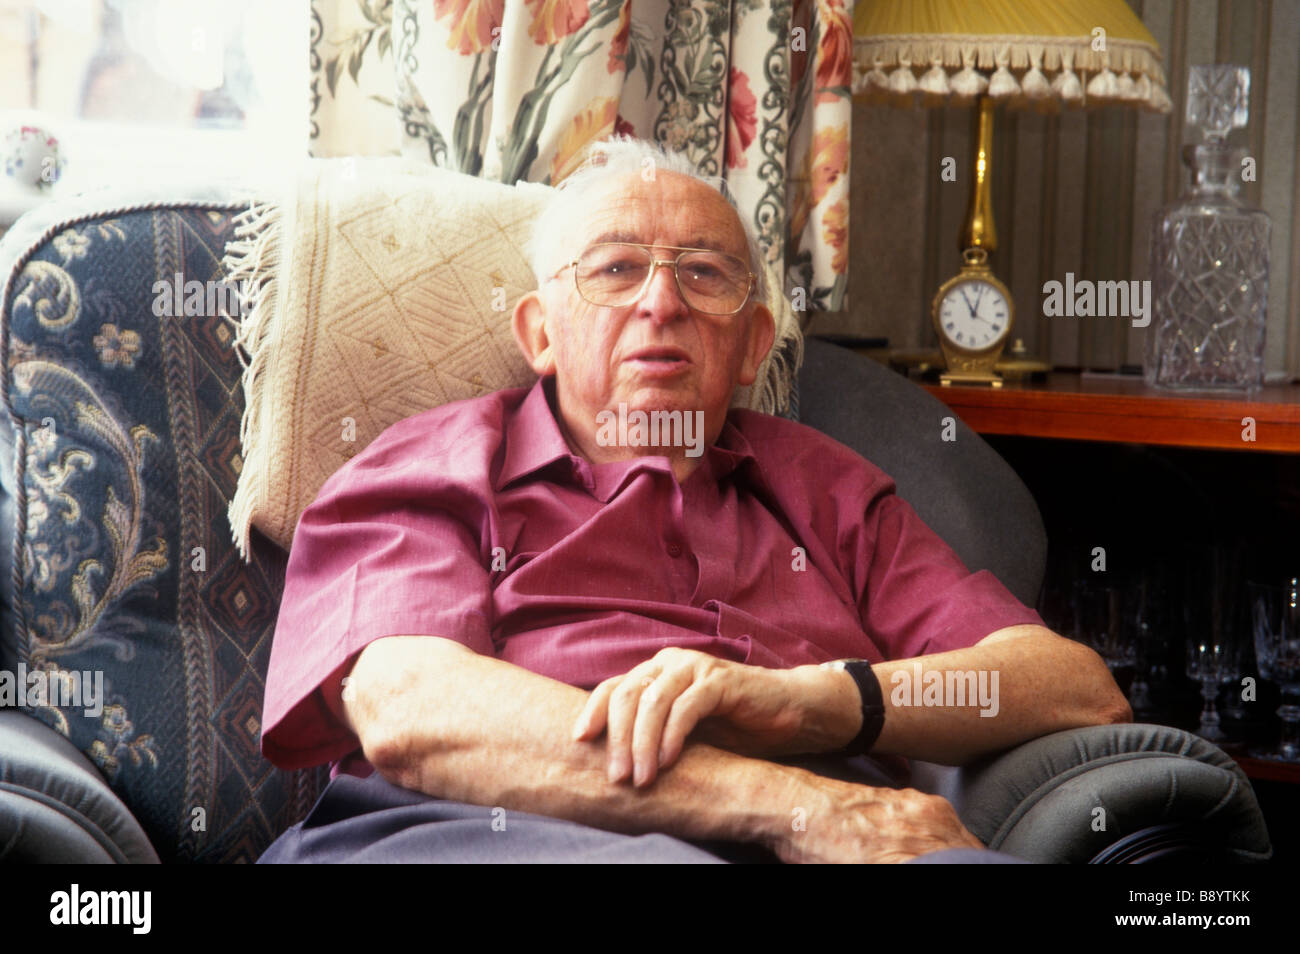 elderly man looking lonely and isolated in the home with clock in the background Stock Photo